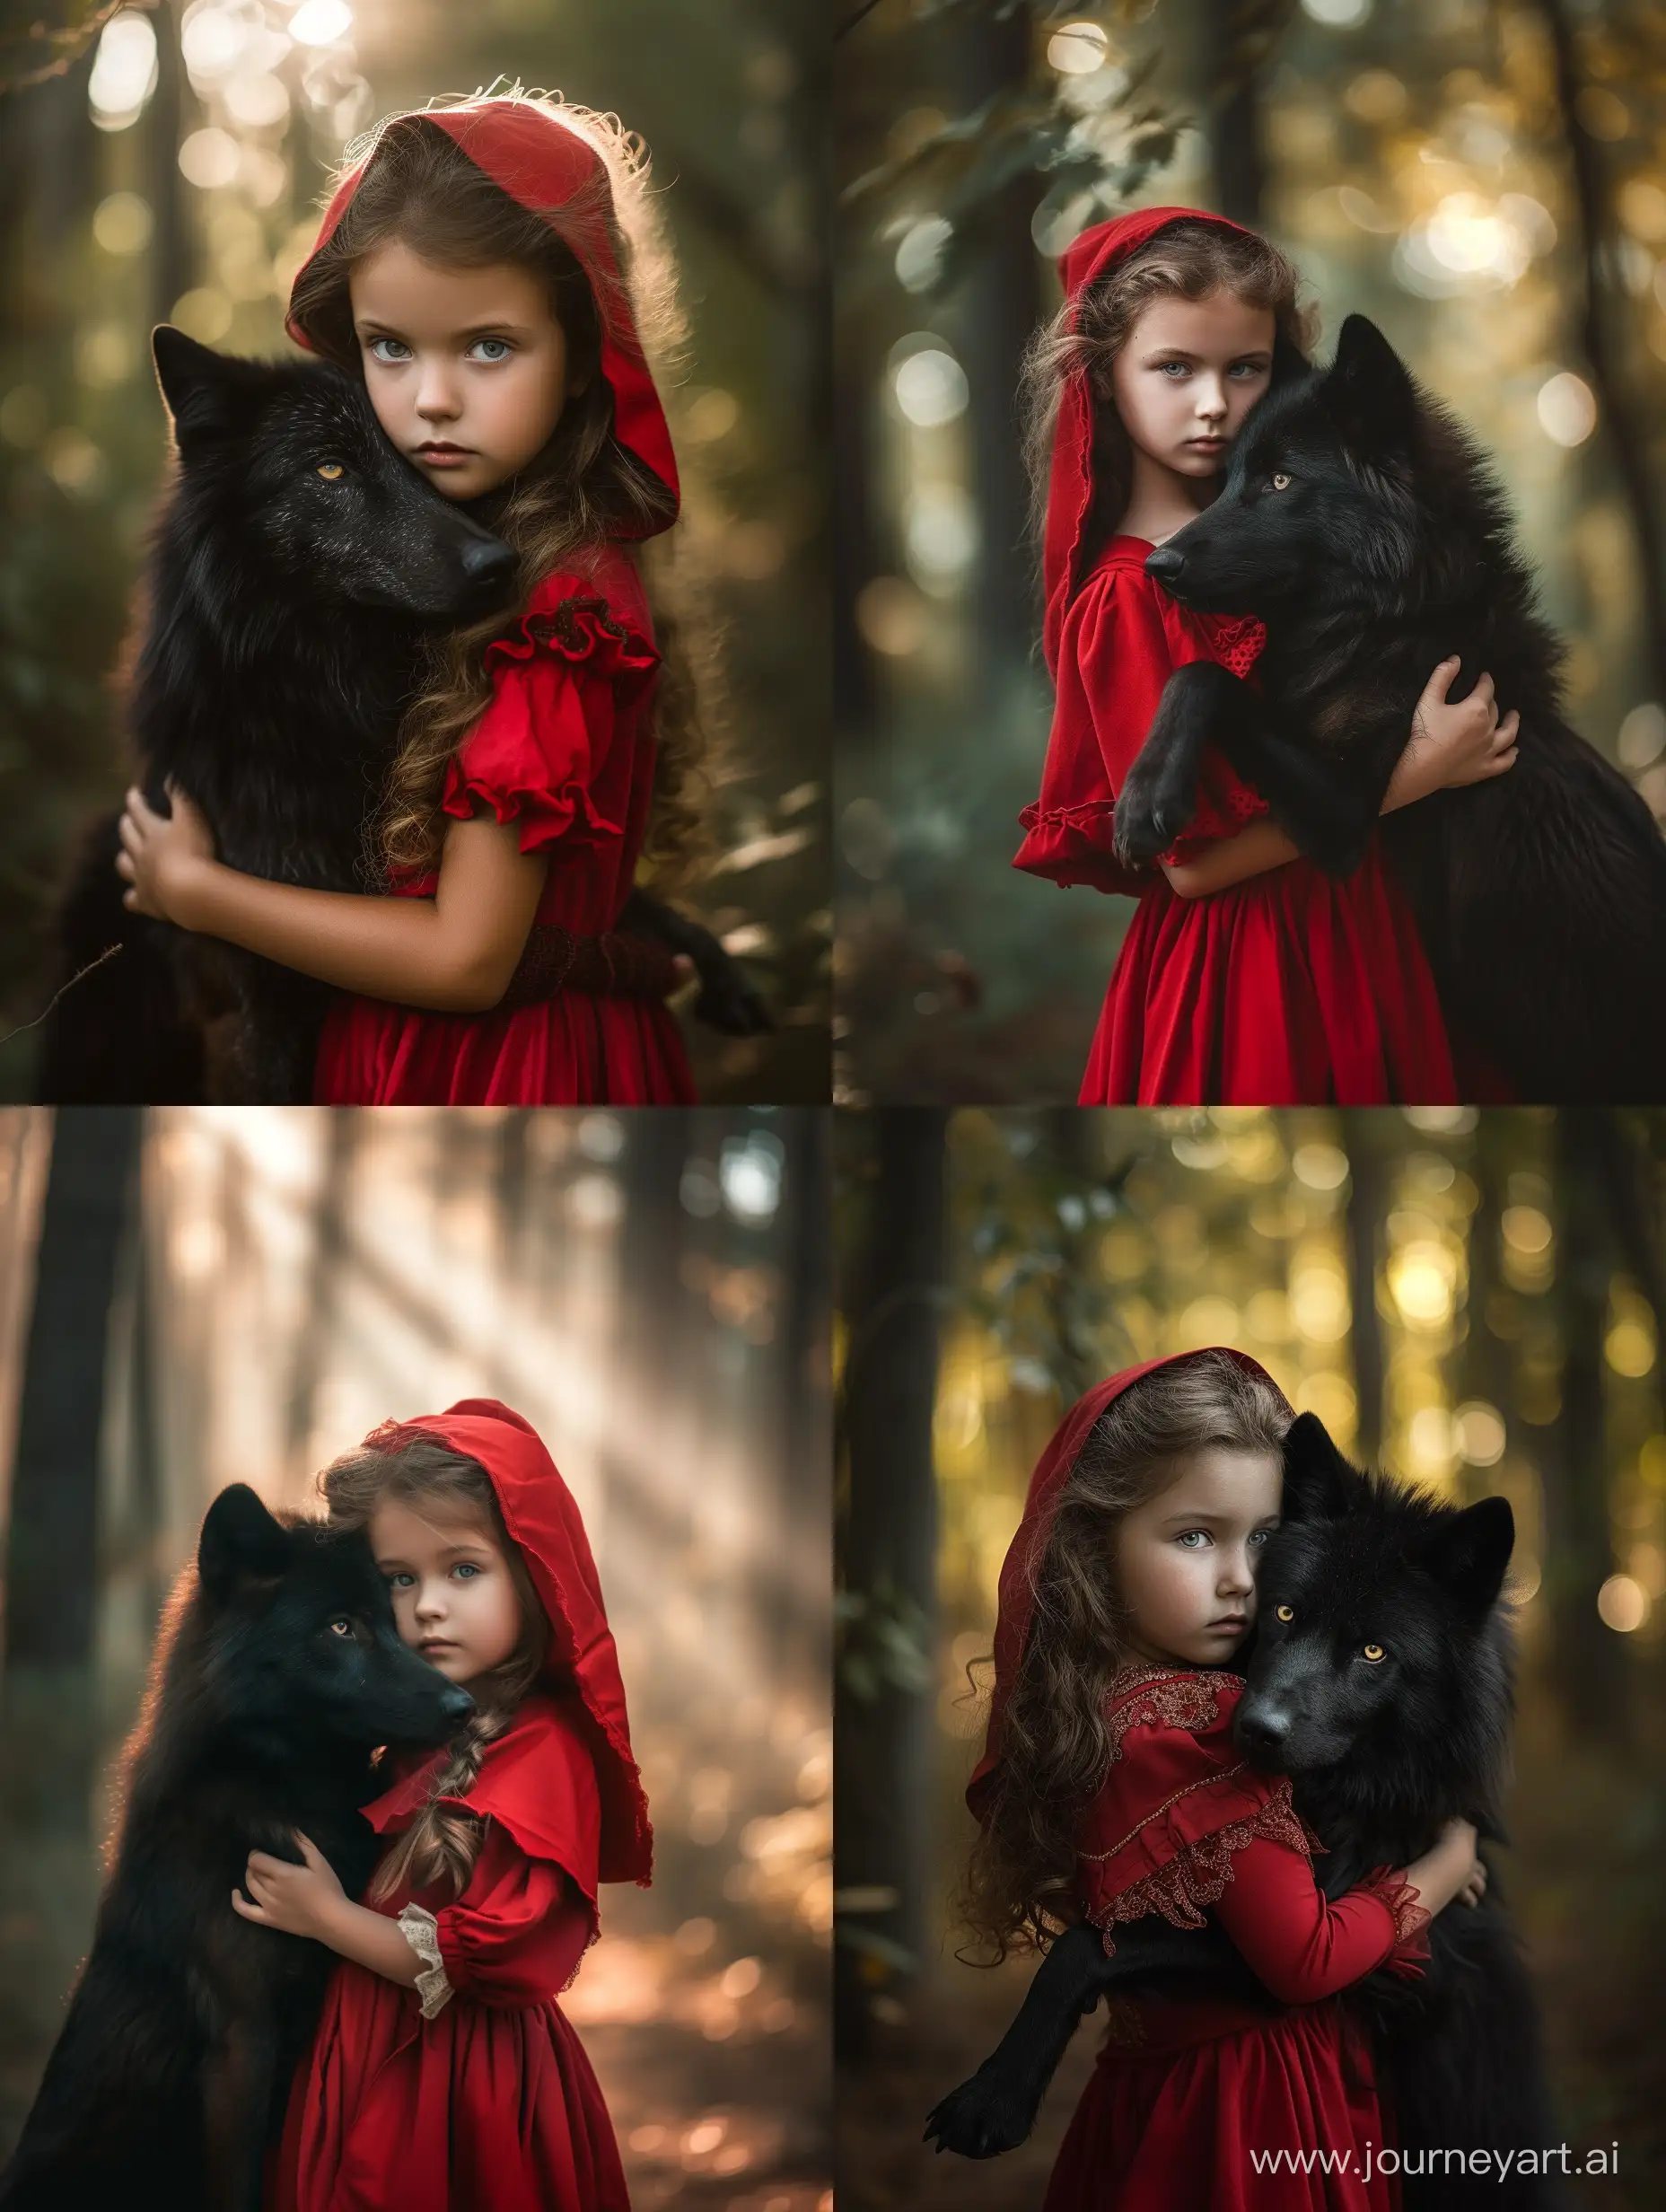 Enchanting-Portrait-Little-Red-Riding-Hood-Embracing-the-Black-Wolf-in-a-Sunlit-Forest